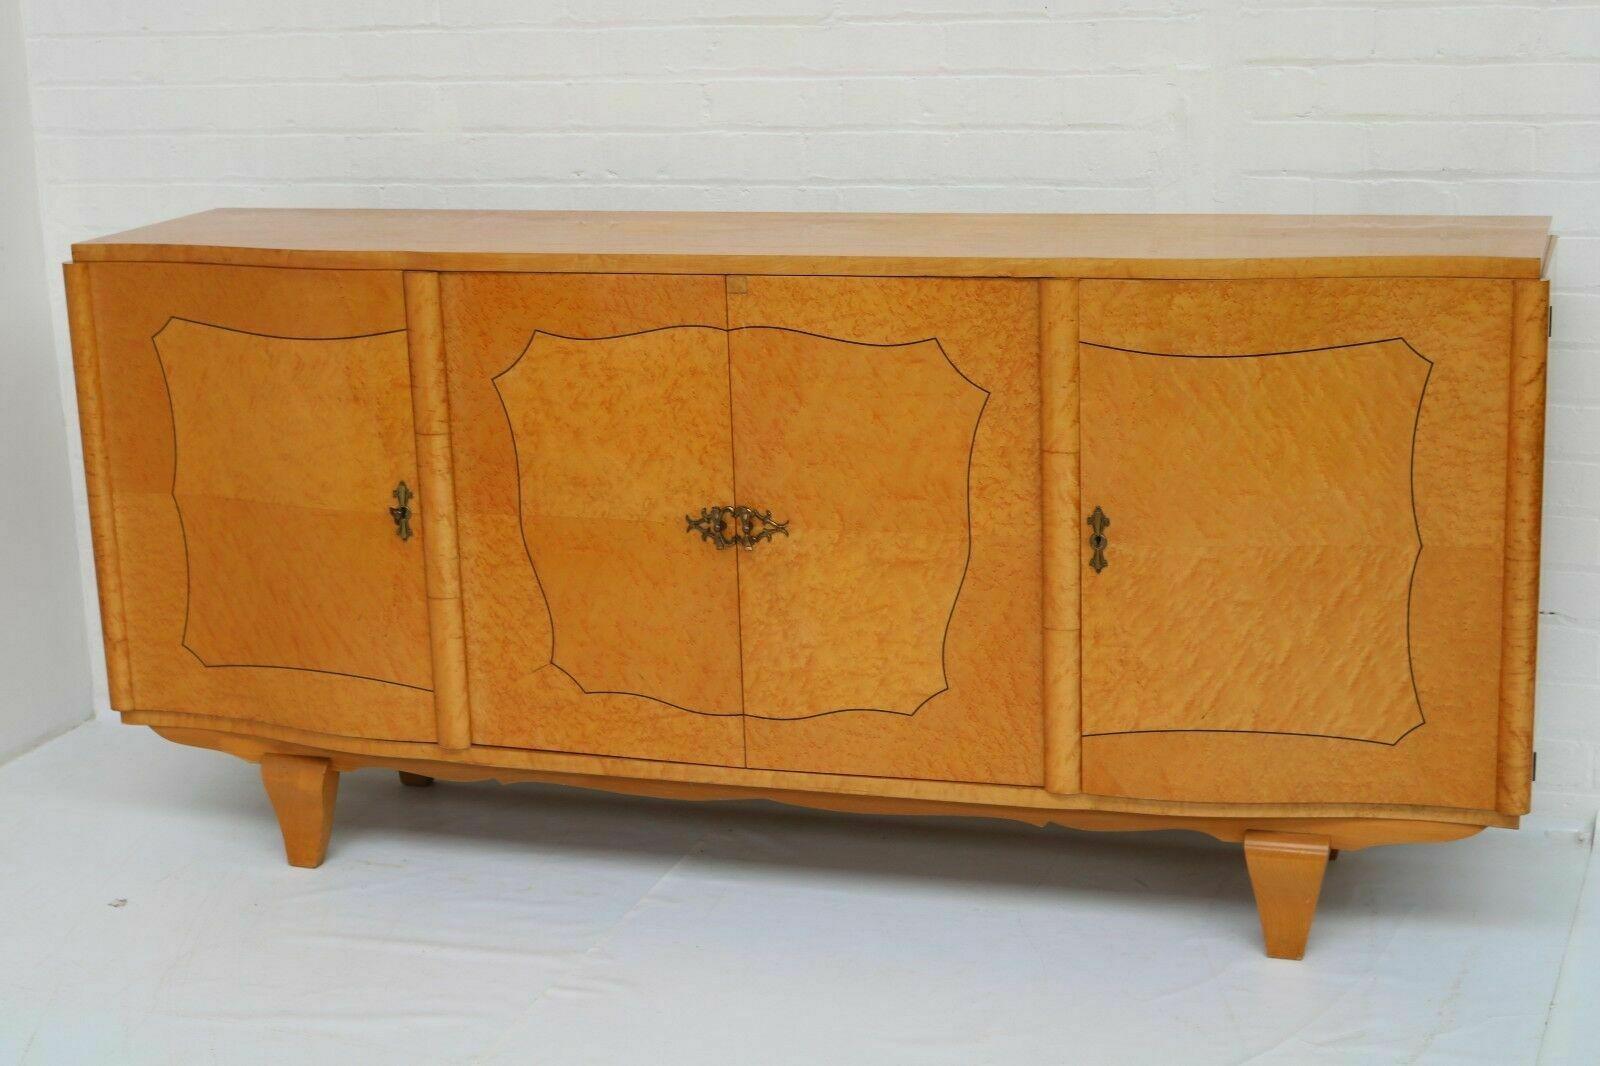 Art Deco bird's eye maple and rosewood inlays sideboard - Credenza, 1930's

SMALL DEFECT ON THE TOP CORNER OF THE RIGHT CENTRAL DOOR (2x2cm wood restoration)

A Classic, beautiful and elegant Art Deco in exquisite Bird's Eye Maple with Rosewood